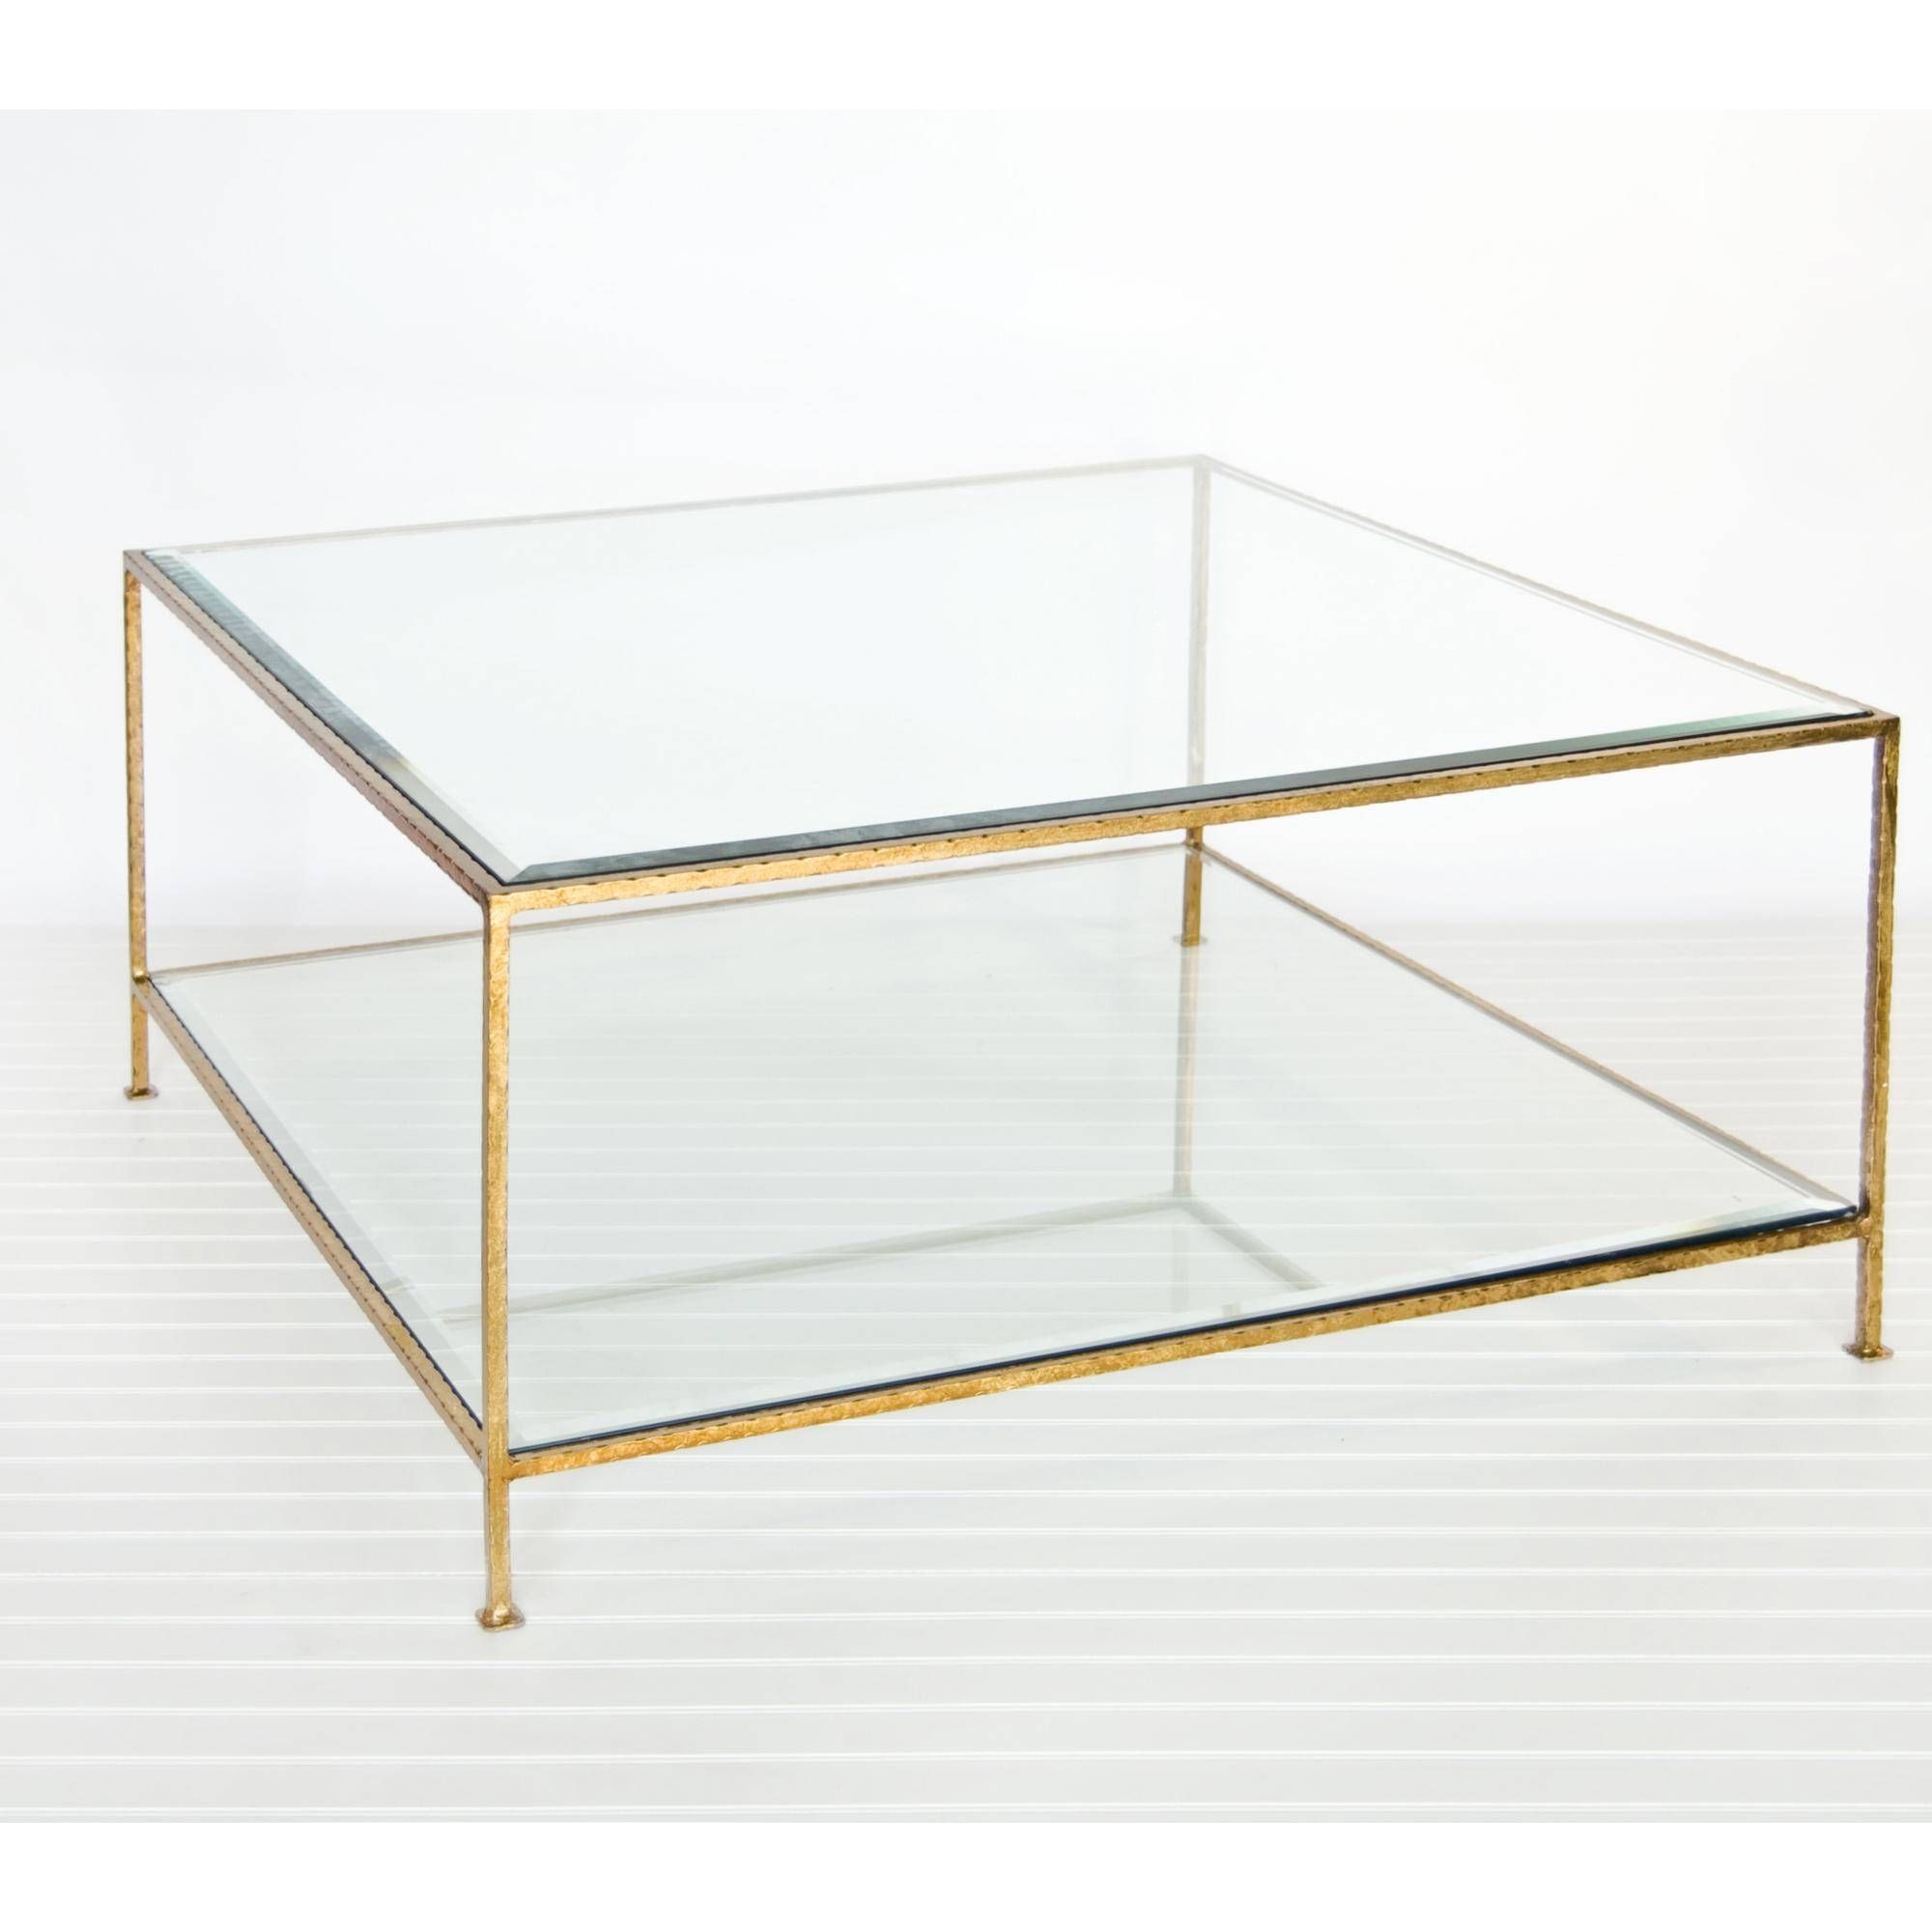 Glass Metal Coffee Tables Uk | Coffee Tables Decoration Throughout Metal Square Coffee Tables (View 13 of 30)